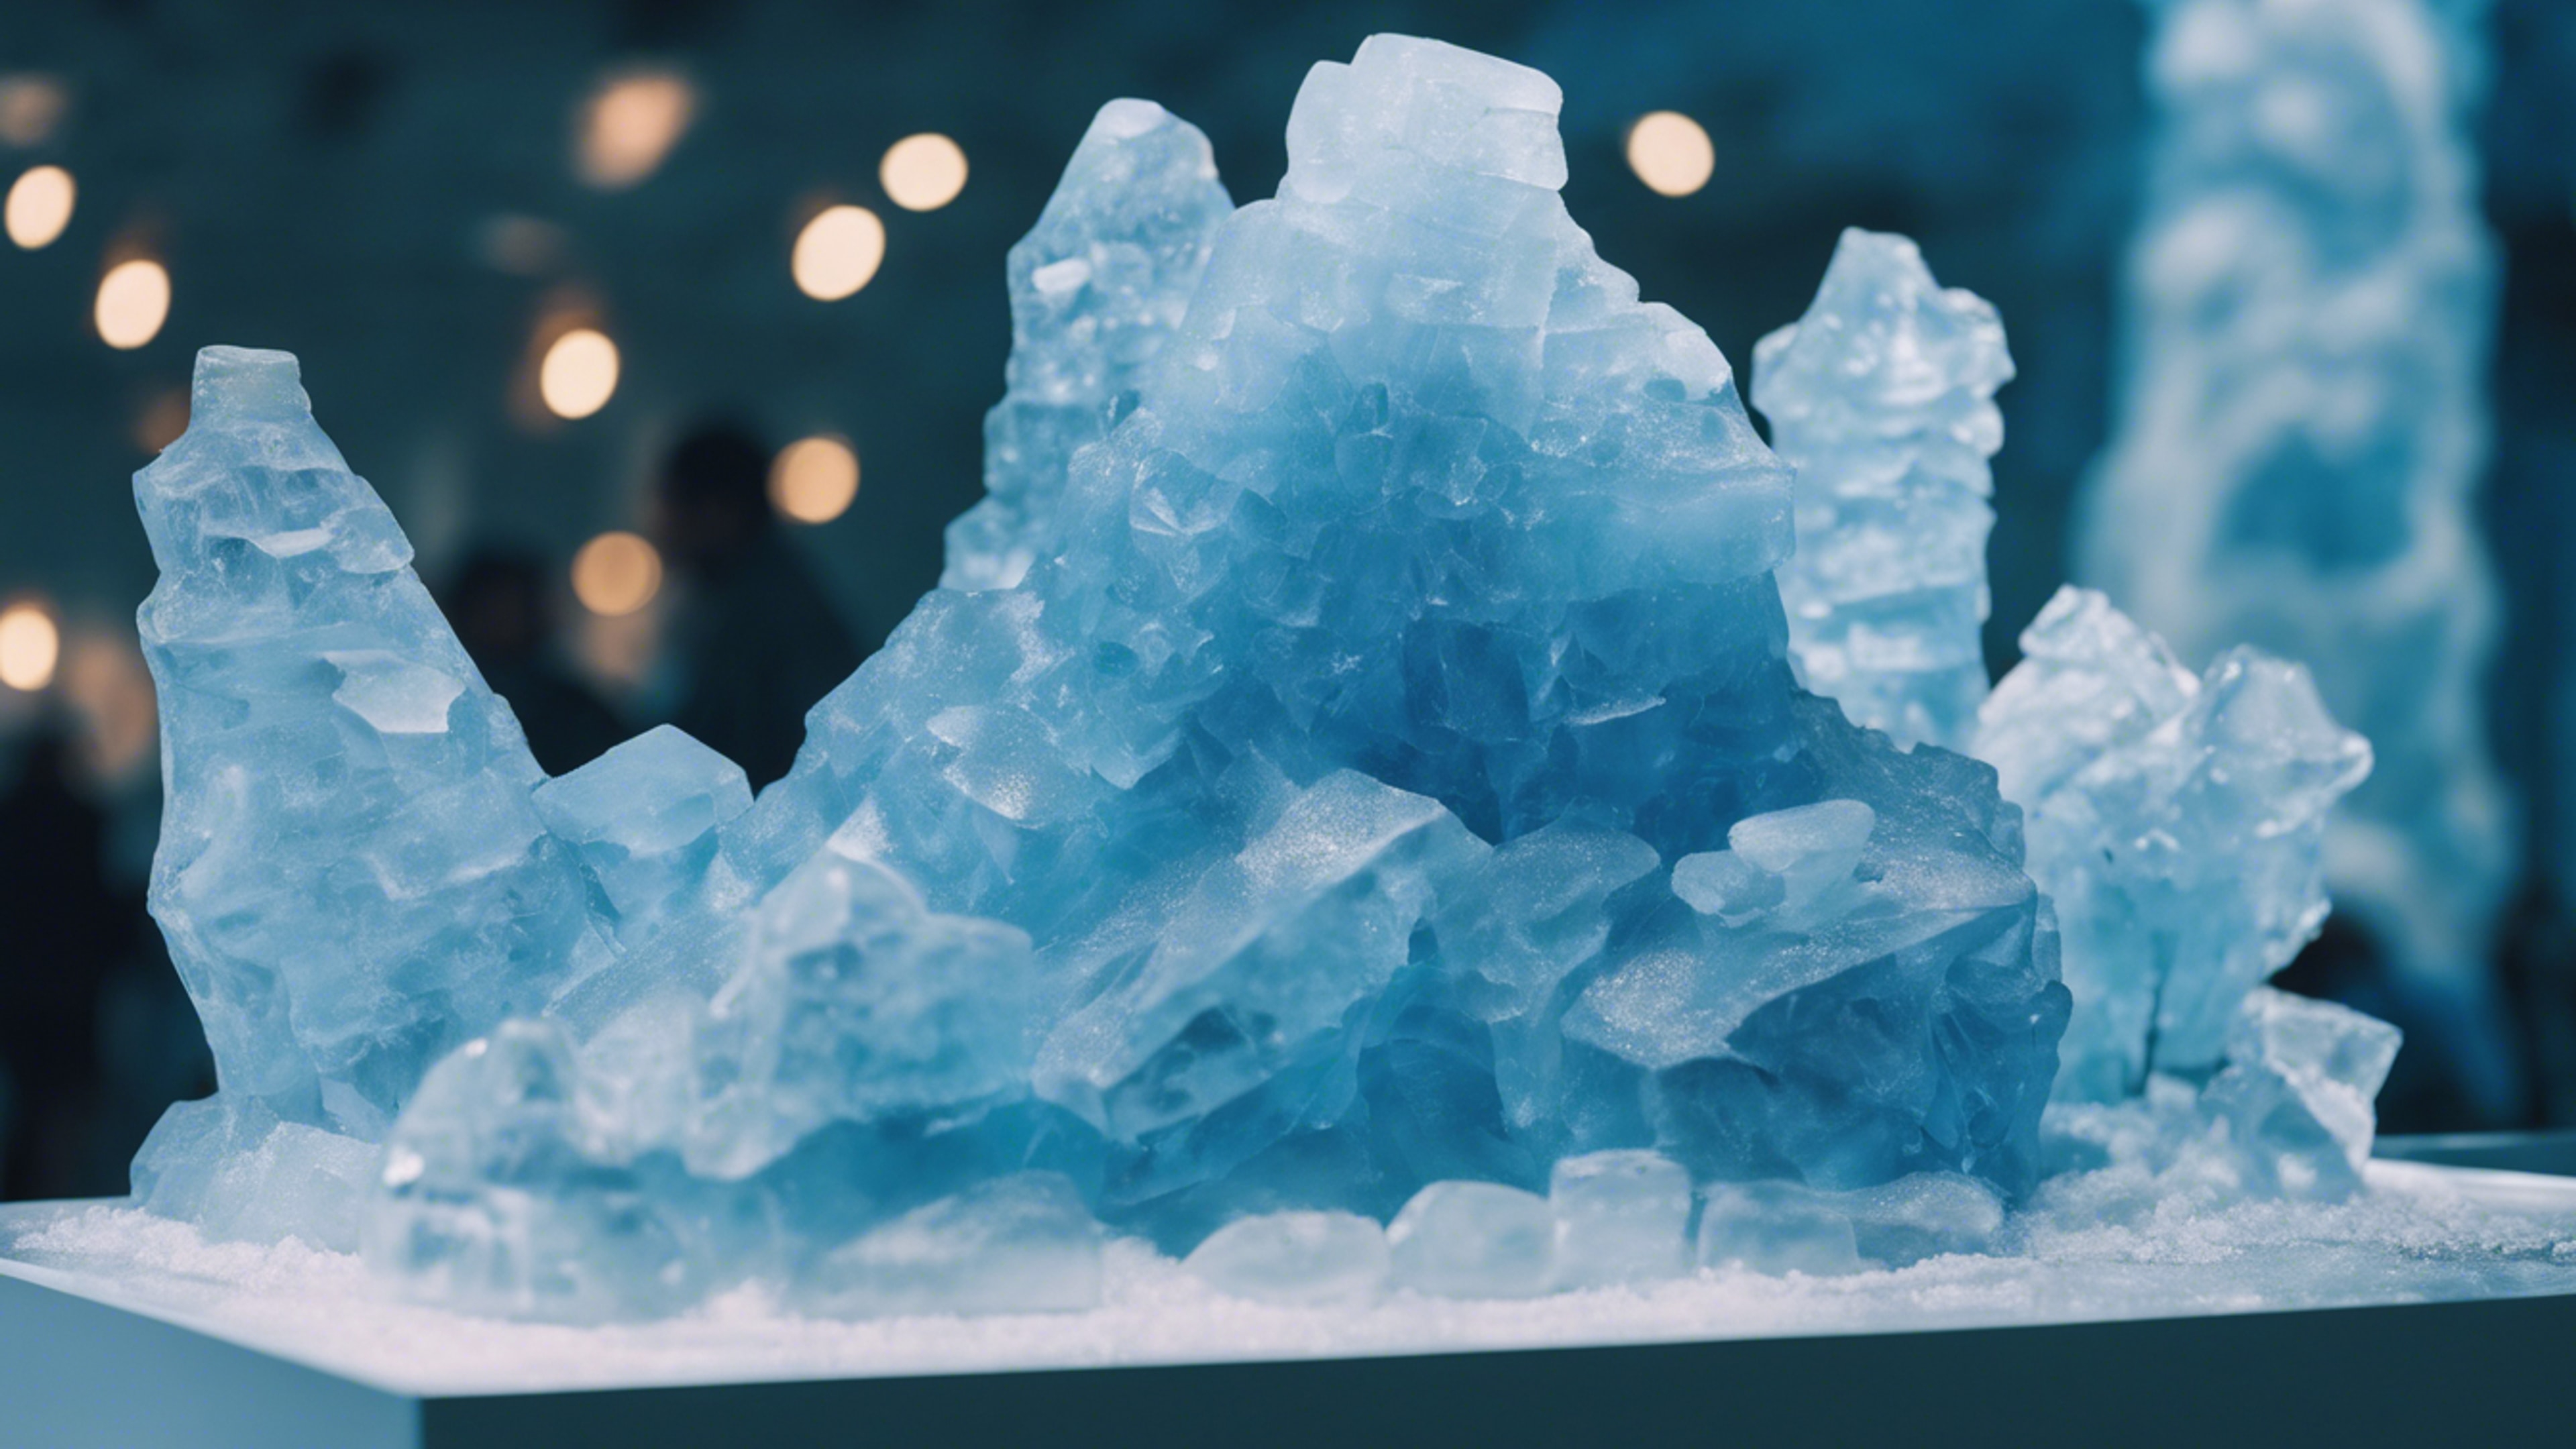 A cool blue ice sculpture displayed in an art exhibition Wallpaper[01392a1631a945a38e16]